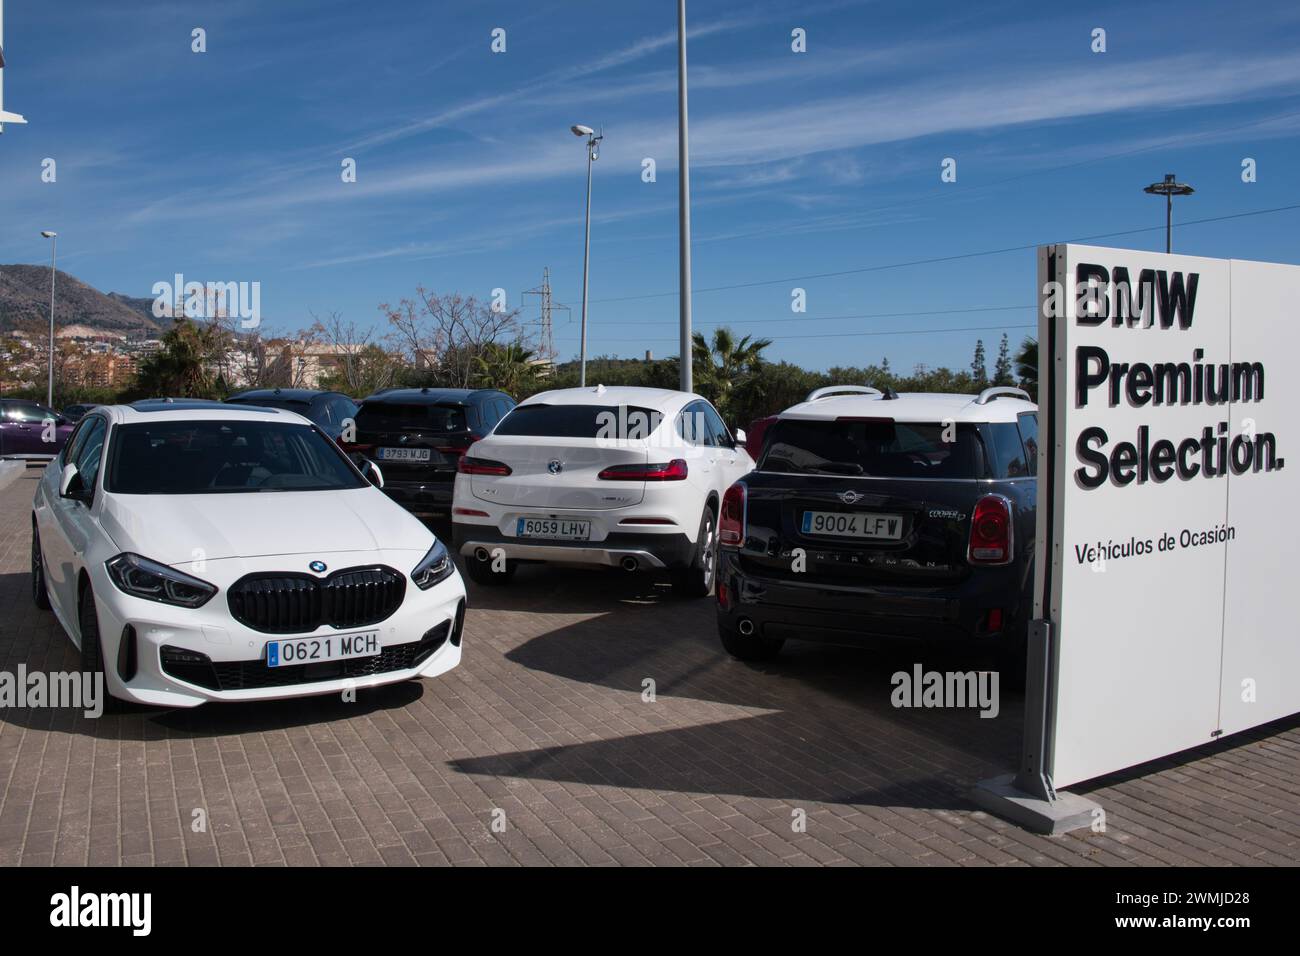 BMW Premium Selection at a BMW car dealership. Second hand cars. Stock Photo